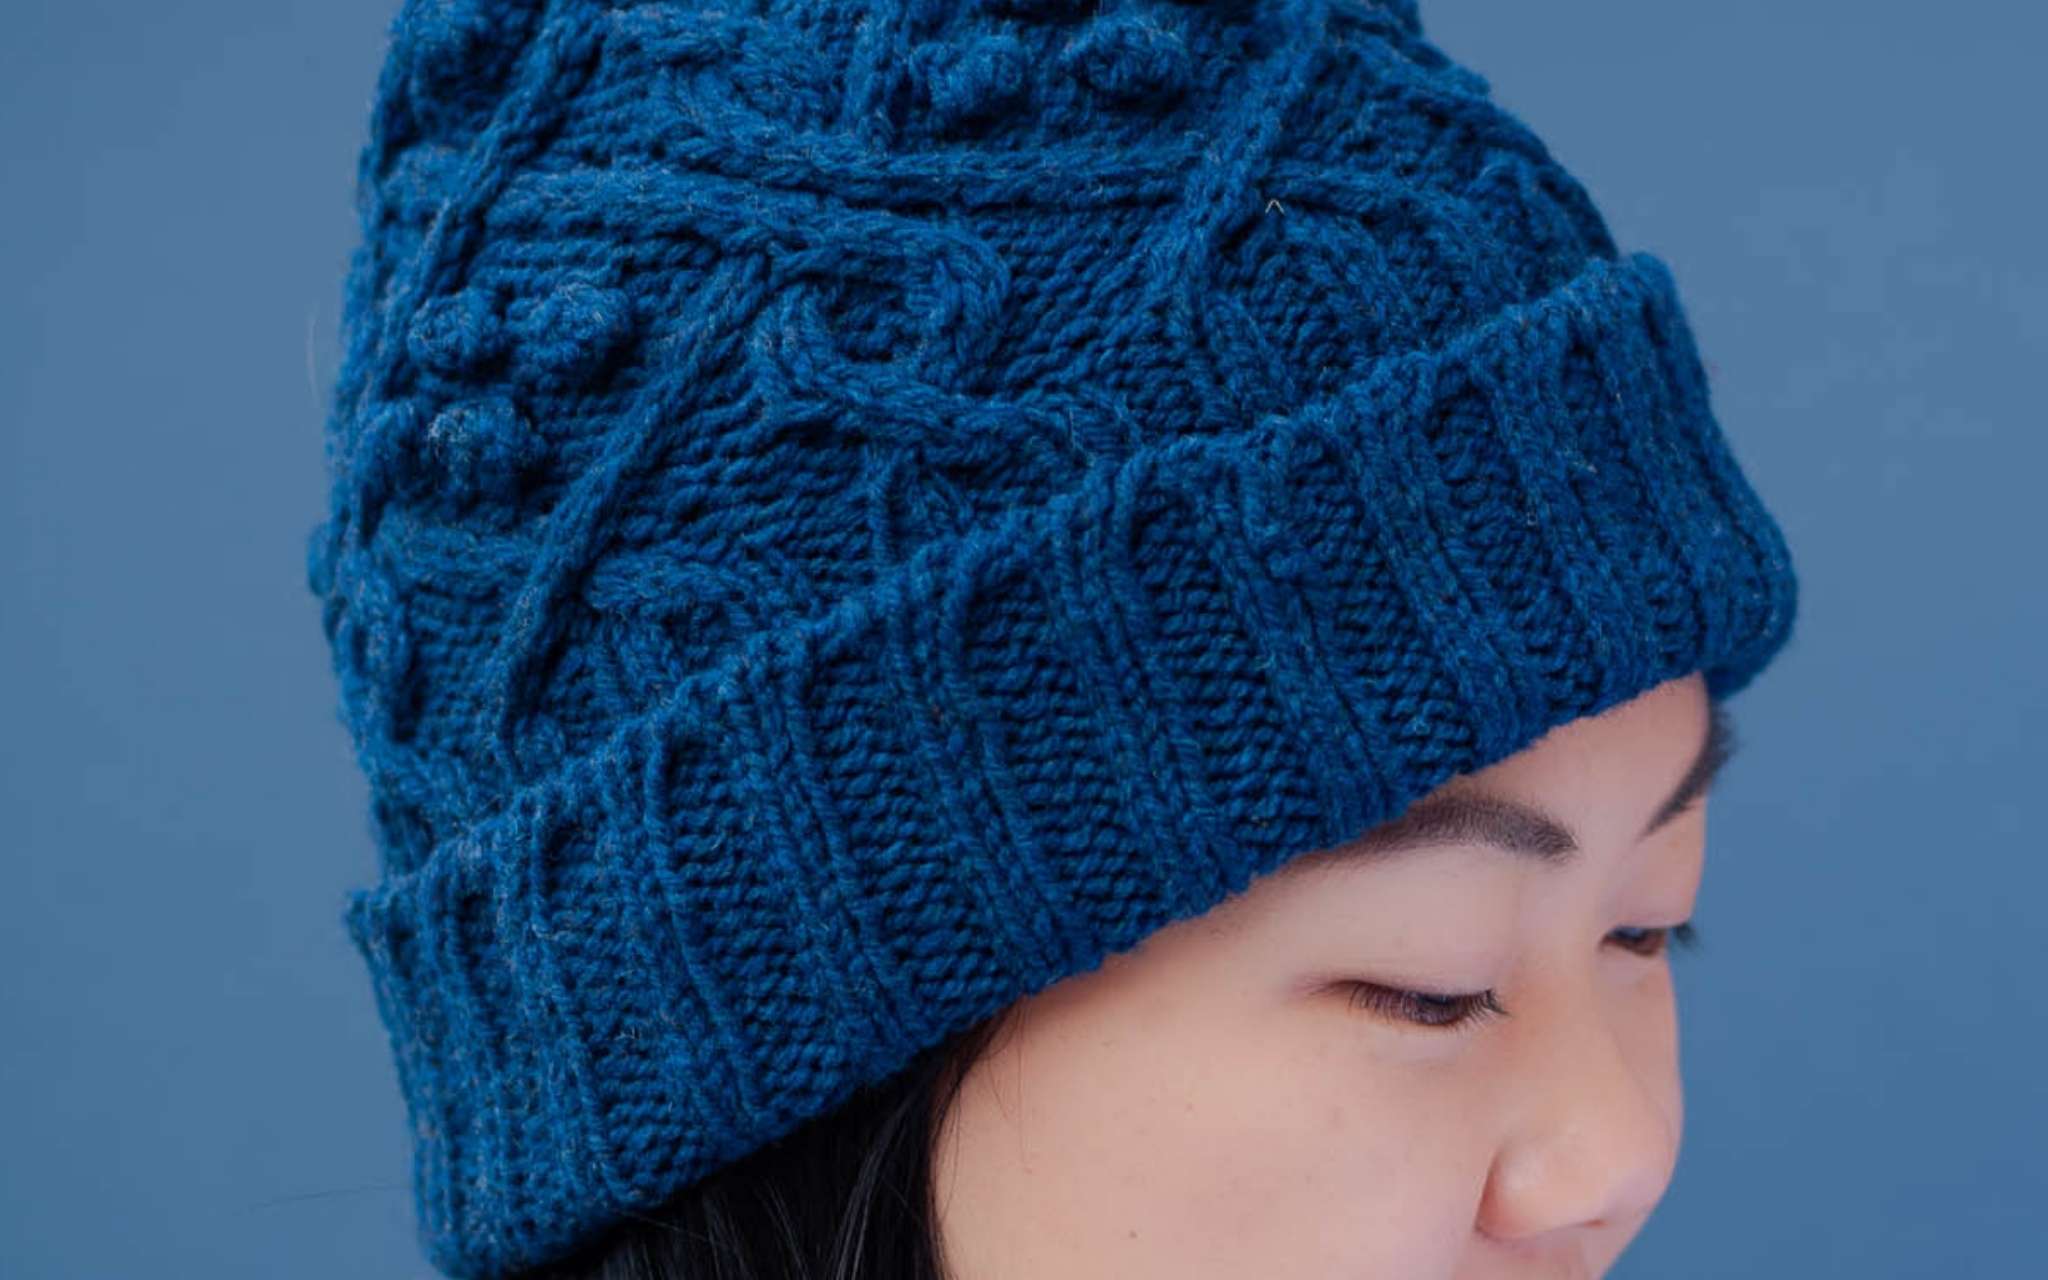 a close up of the brim of a blue cabled hat with a ribbed, folded edge